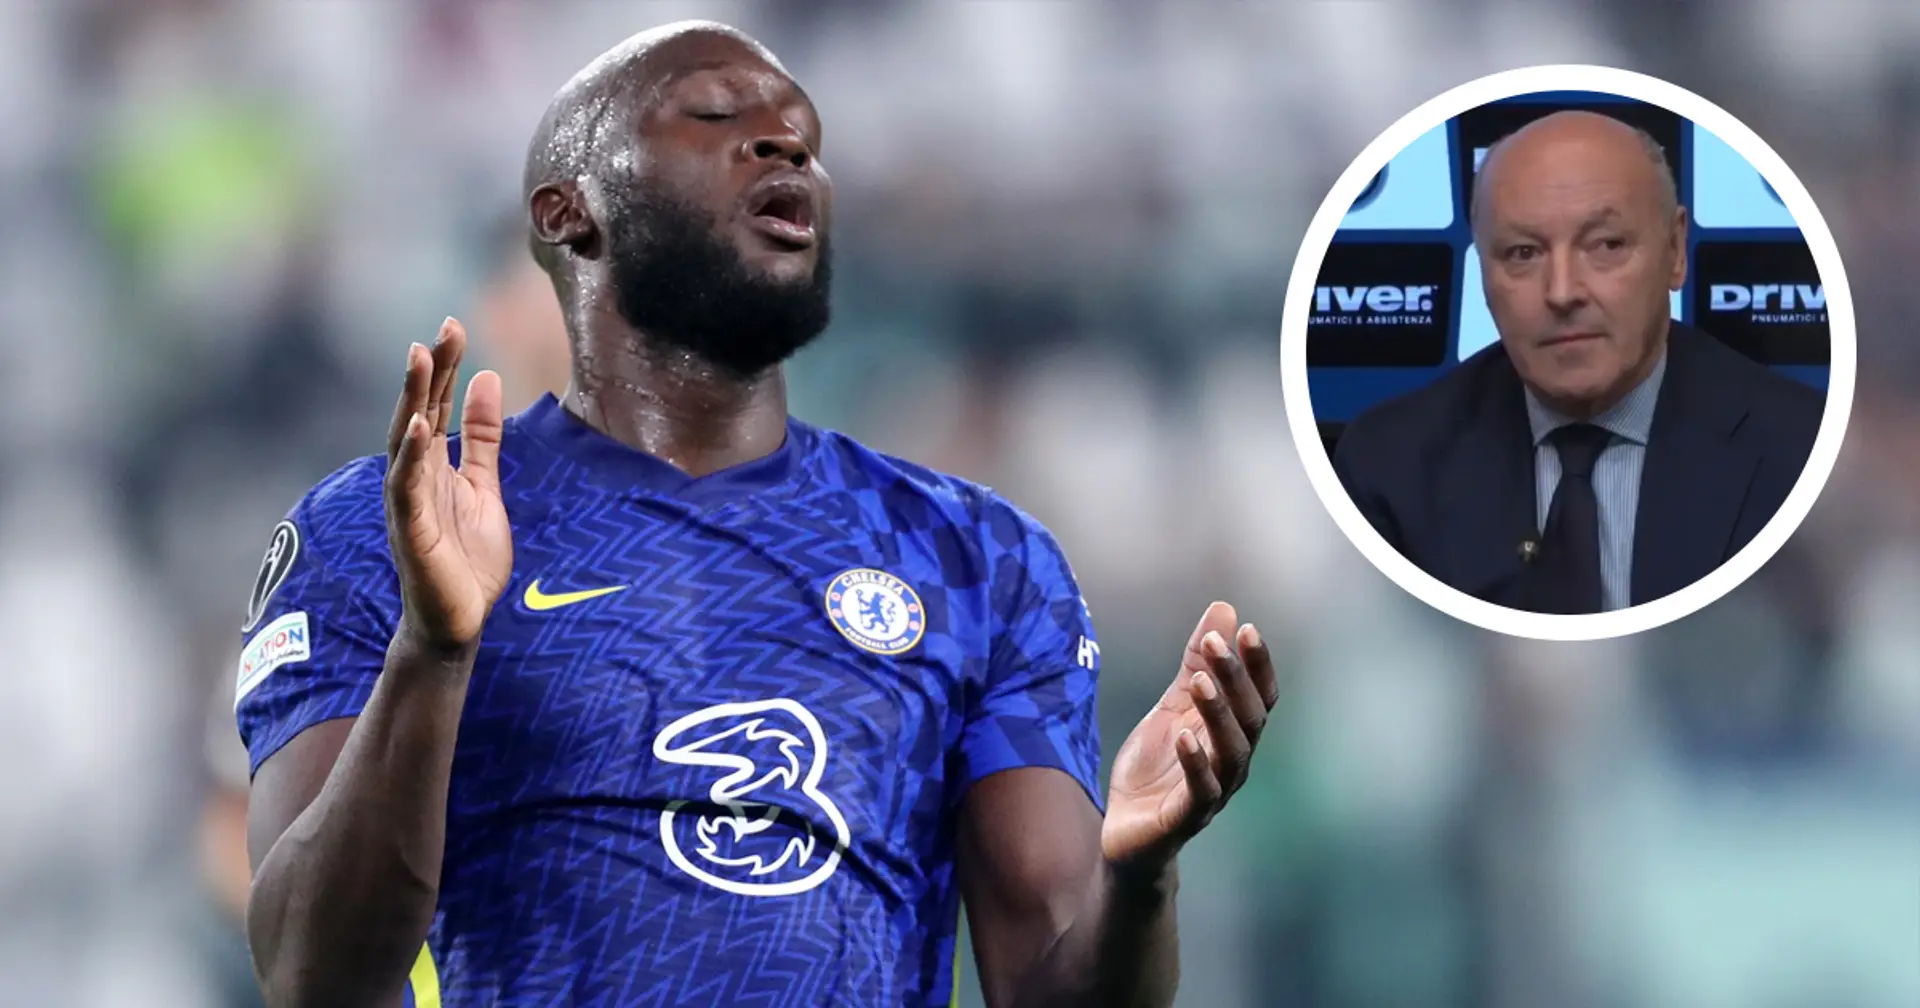 Inter CEO Marotta: 'Lukaku left for Chelsea because of the money'